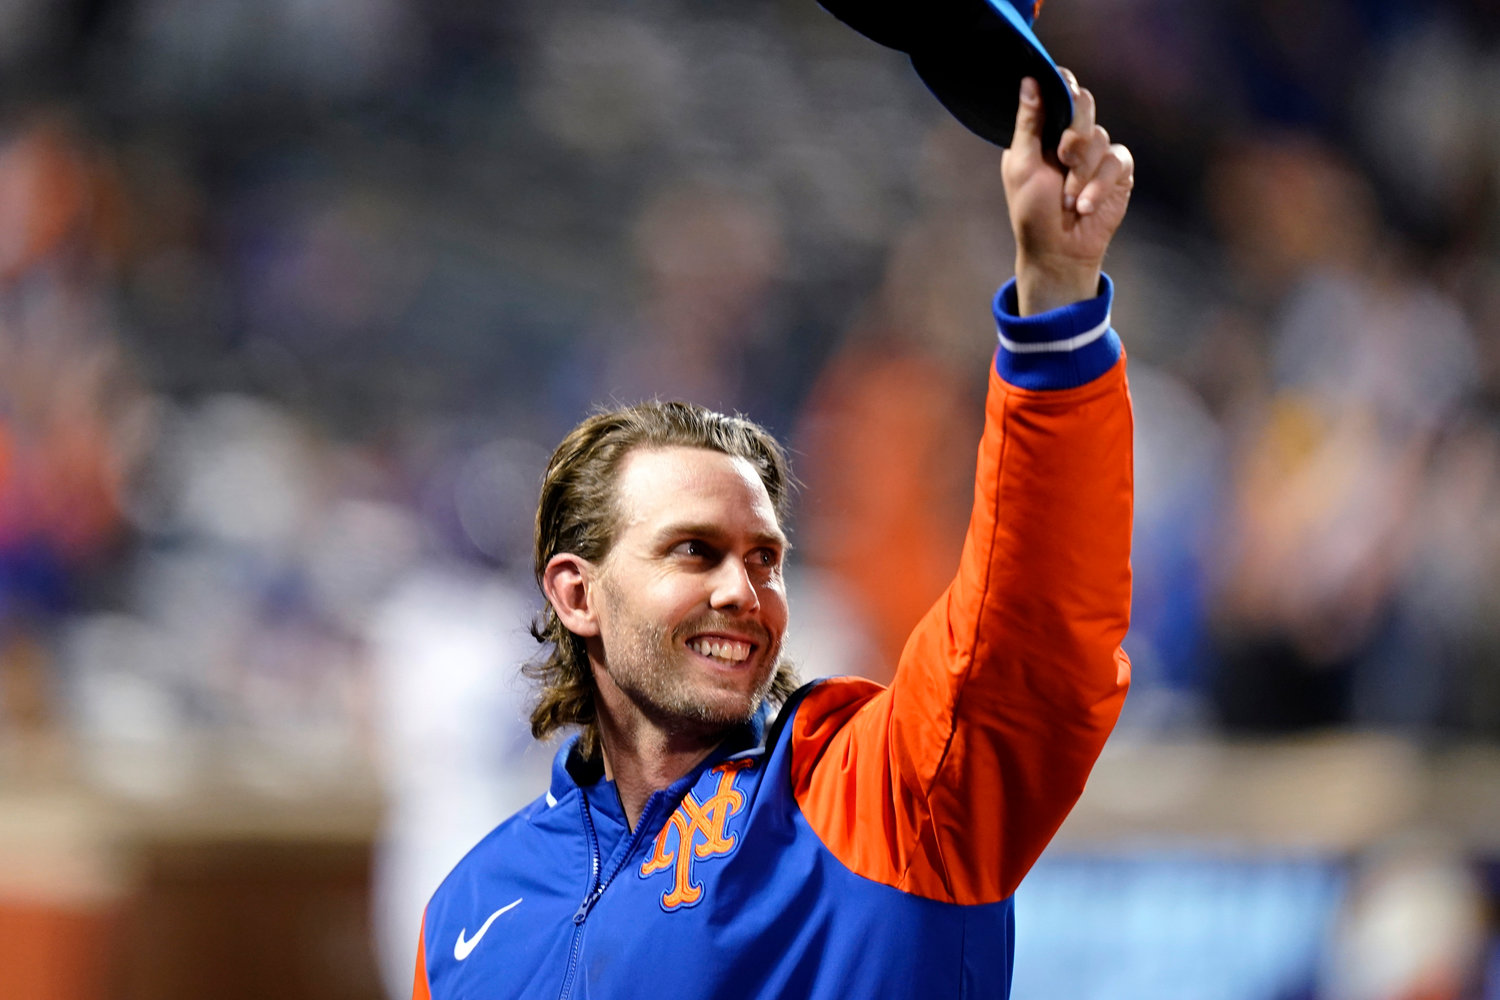 New York Mets' Jeff McNeil gestures to fans during the fourth inning of the team's baseball game against the Washington Nationals on Oct. 5, 2022, in New York. McNeil and the Mets finalized a $50 million, four-year contract Tuesday, Jan. 31, 2023 that avoided a salary arbitration hearing.